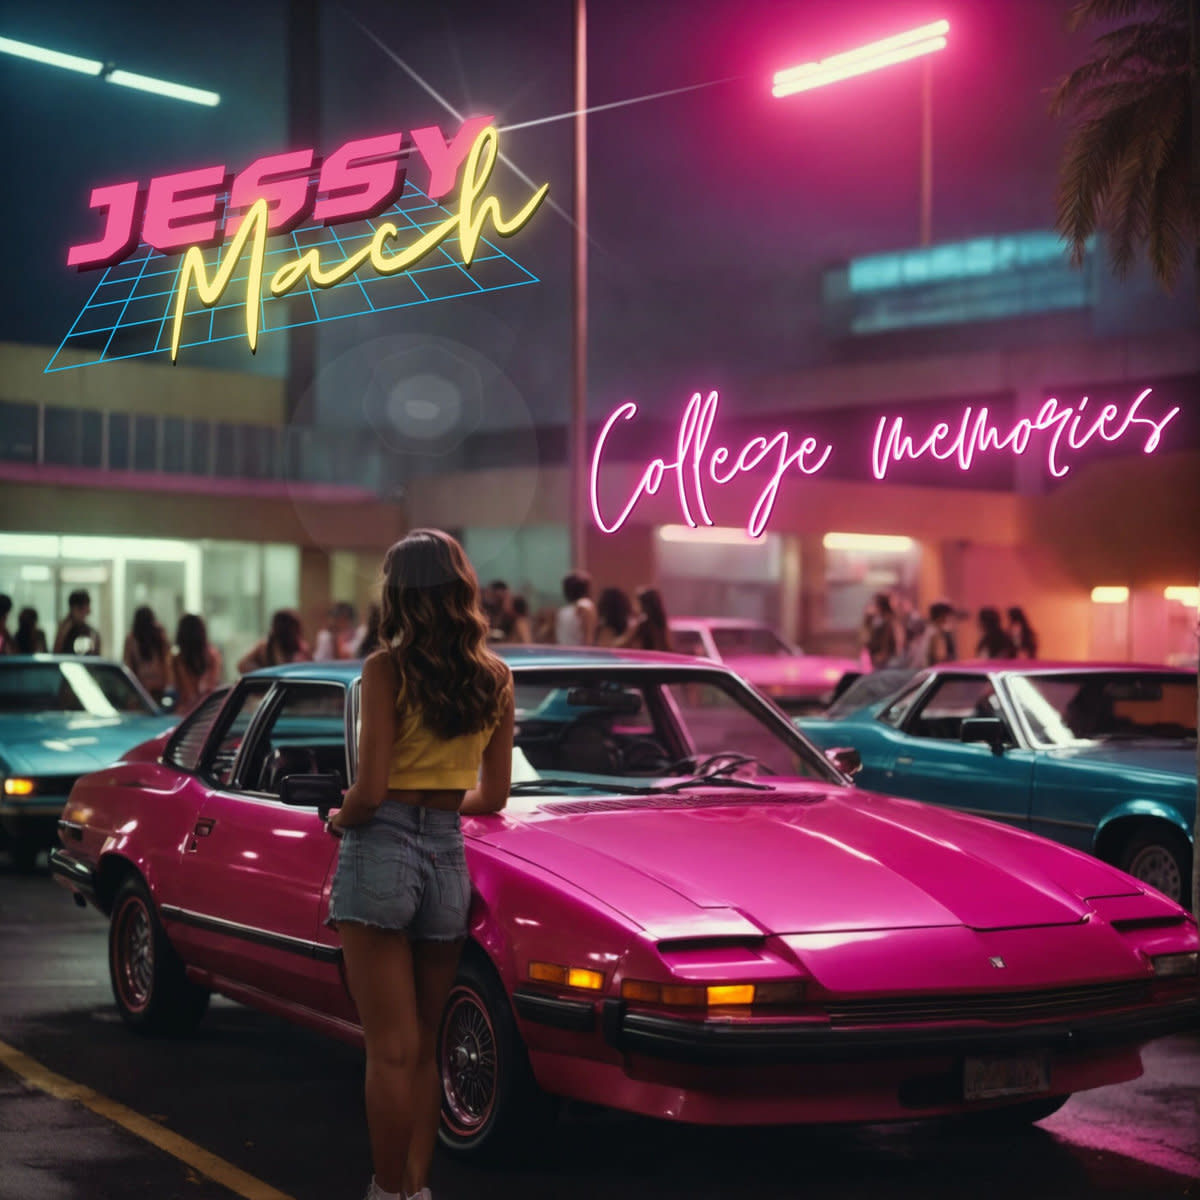 Synth Single Review: “College memories” by JESSY MACH